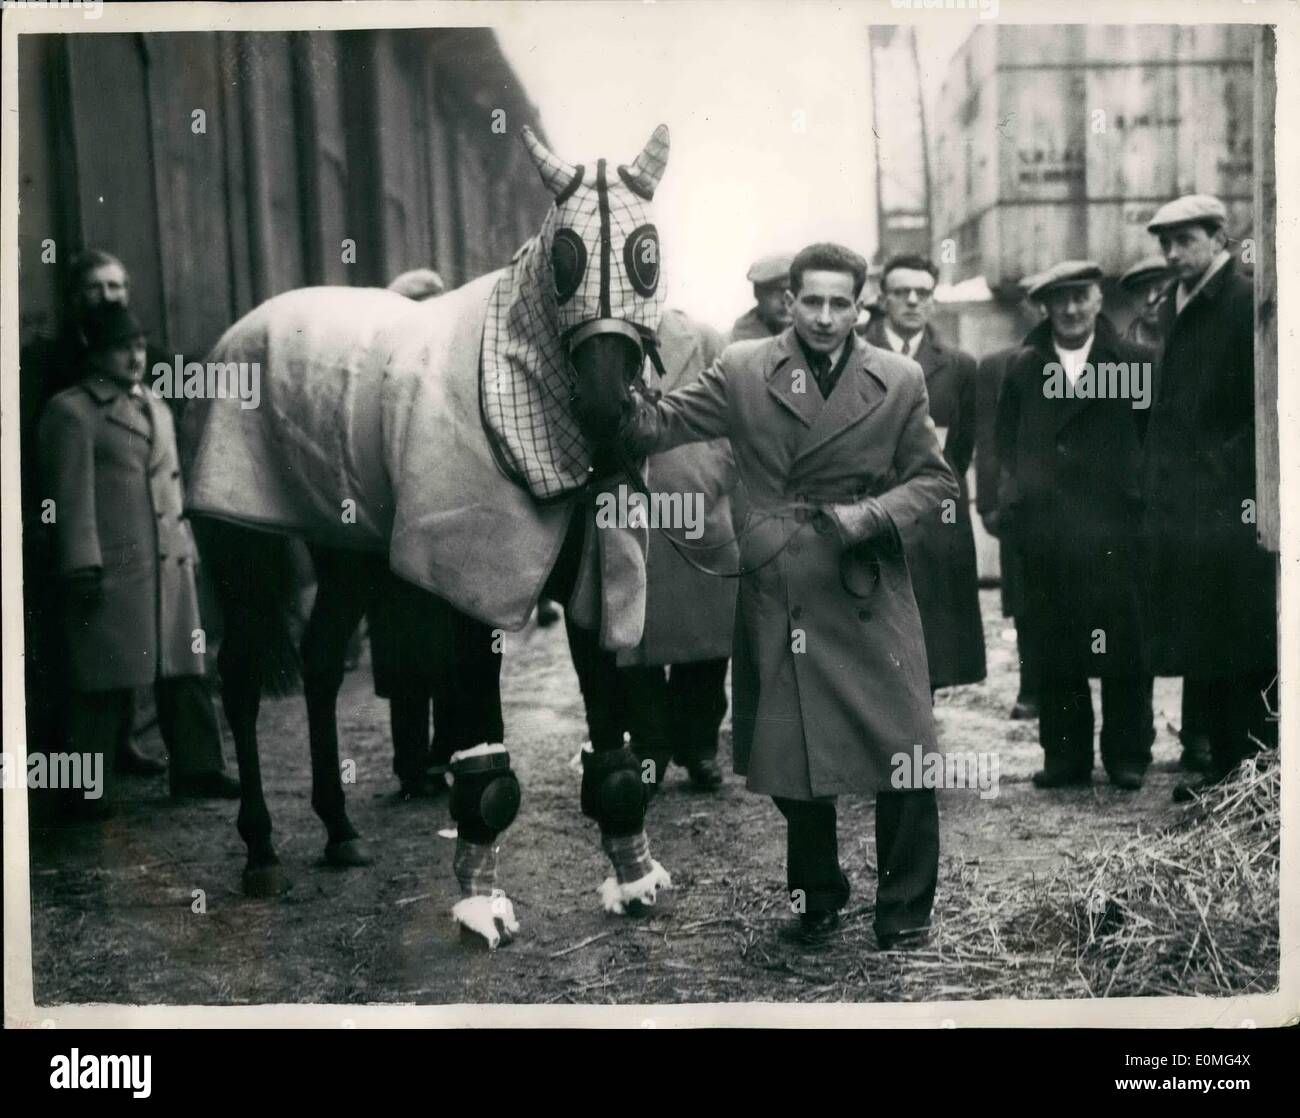 Jan. 01, 1955 - LANDAU GOLD ABOARD - BOUNDFOR AUSTRALIA. The queen's racehorse, LANDAU, which was sold to Australian, Mr. E.A. Underwood for 21,000 - this morning went aboard the Port Fremantle, at King George V Dock, London, KEYSTONE PHOTO SHOWS:- LANDAU seen with apprentice CLIFFORD LINES,19 - who will ccompany the hords to Australia - seen at King George V Dock, London this morning. Stock Photo